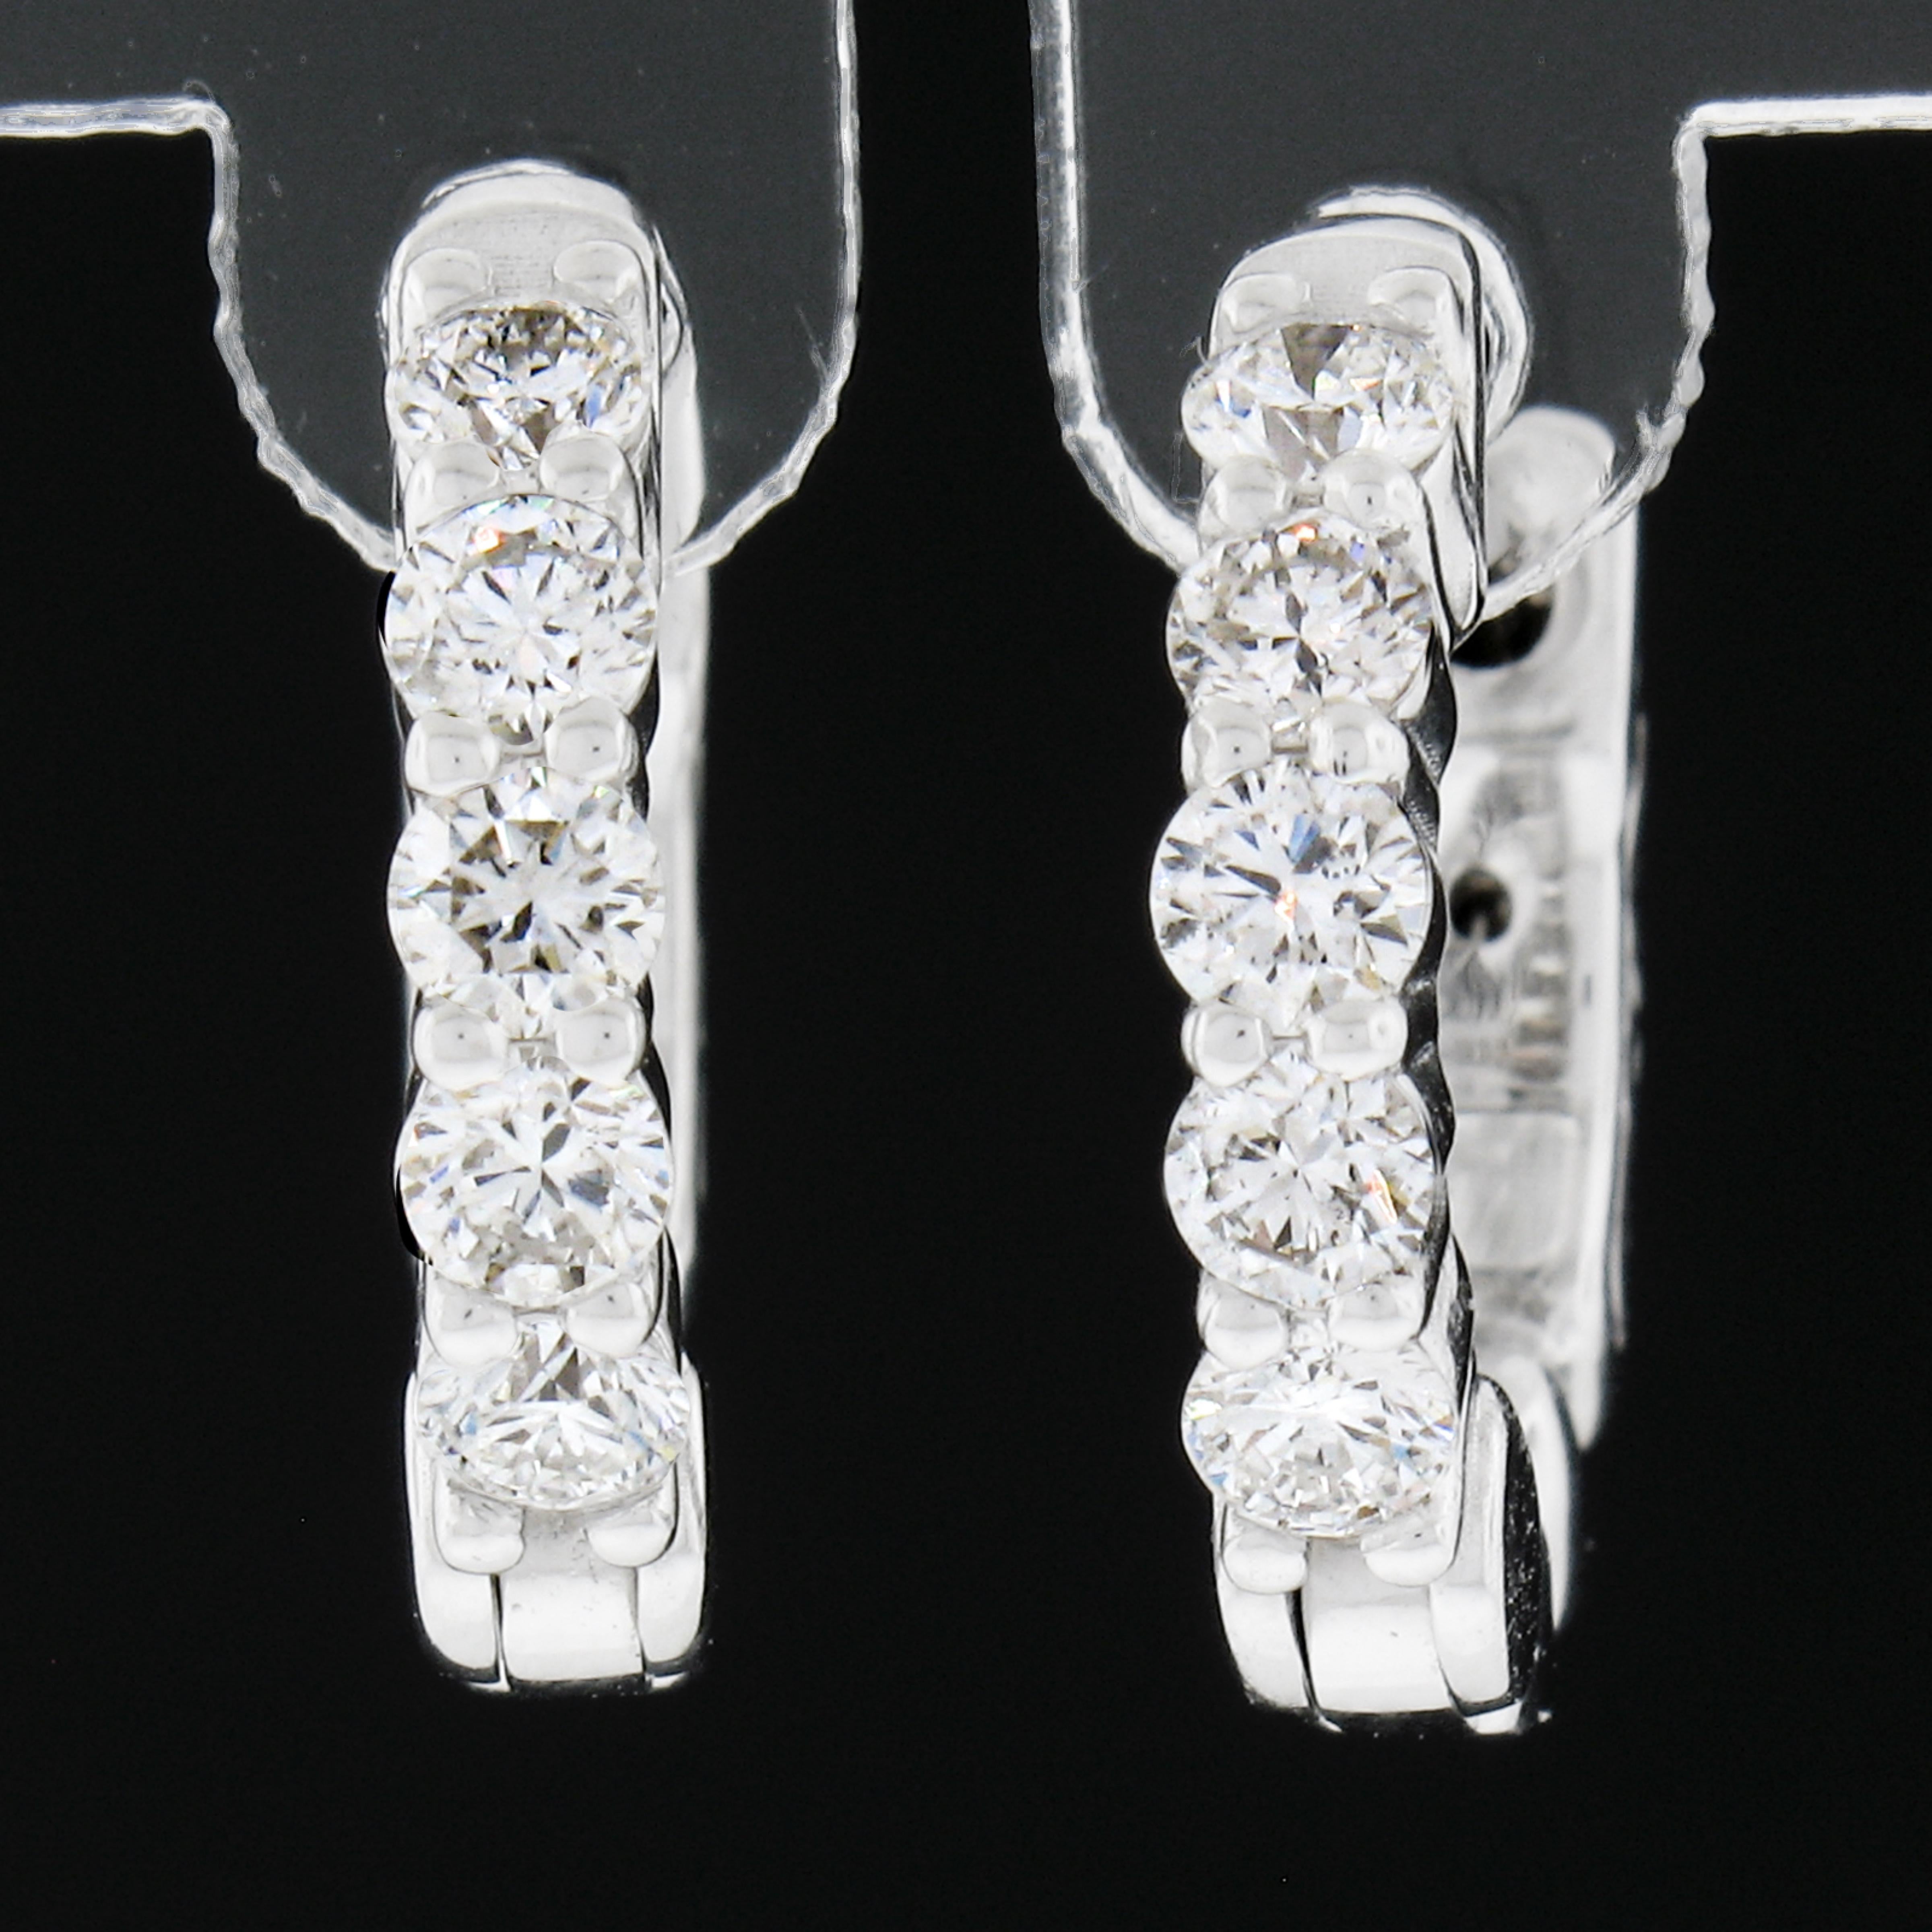 This elegant and brilliant pair of hoop earrings was newly crafted from solid 14k White gold and features exactly 0.51 carats of round brilliant cut diamonds. The diamonds sparkle very brilliantly and are shared-prong set across the front side of